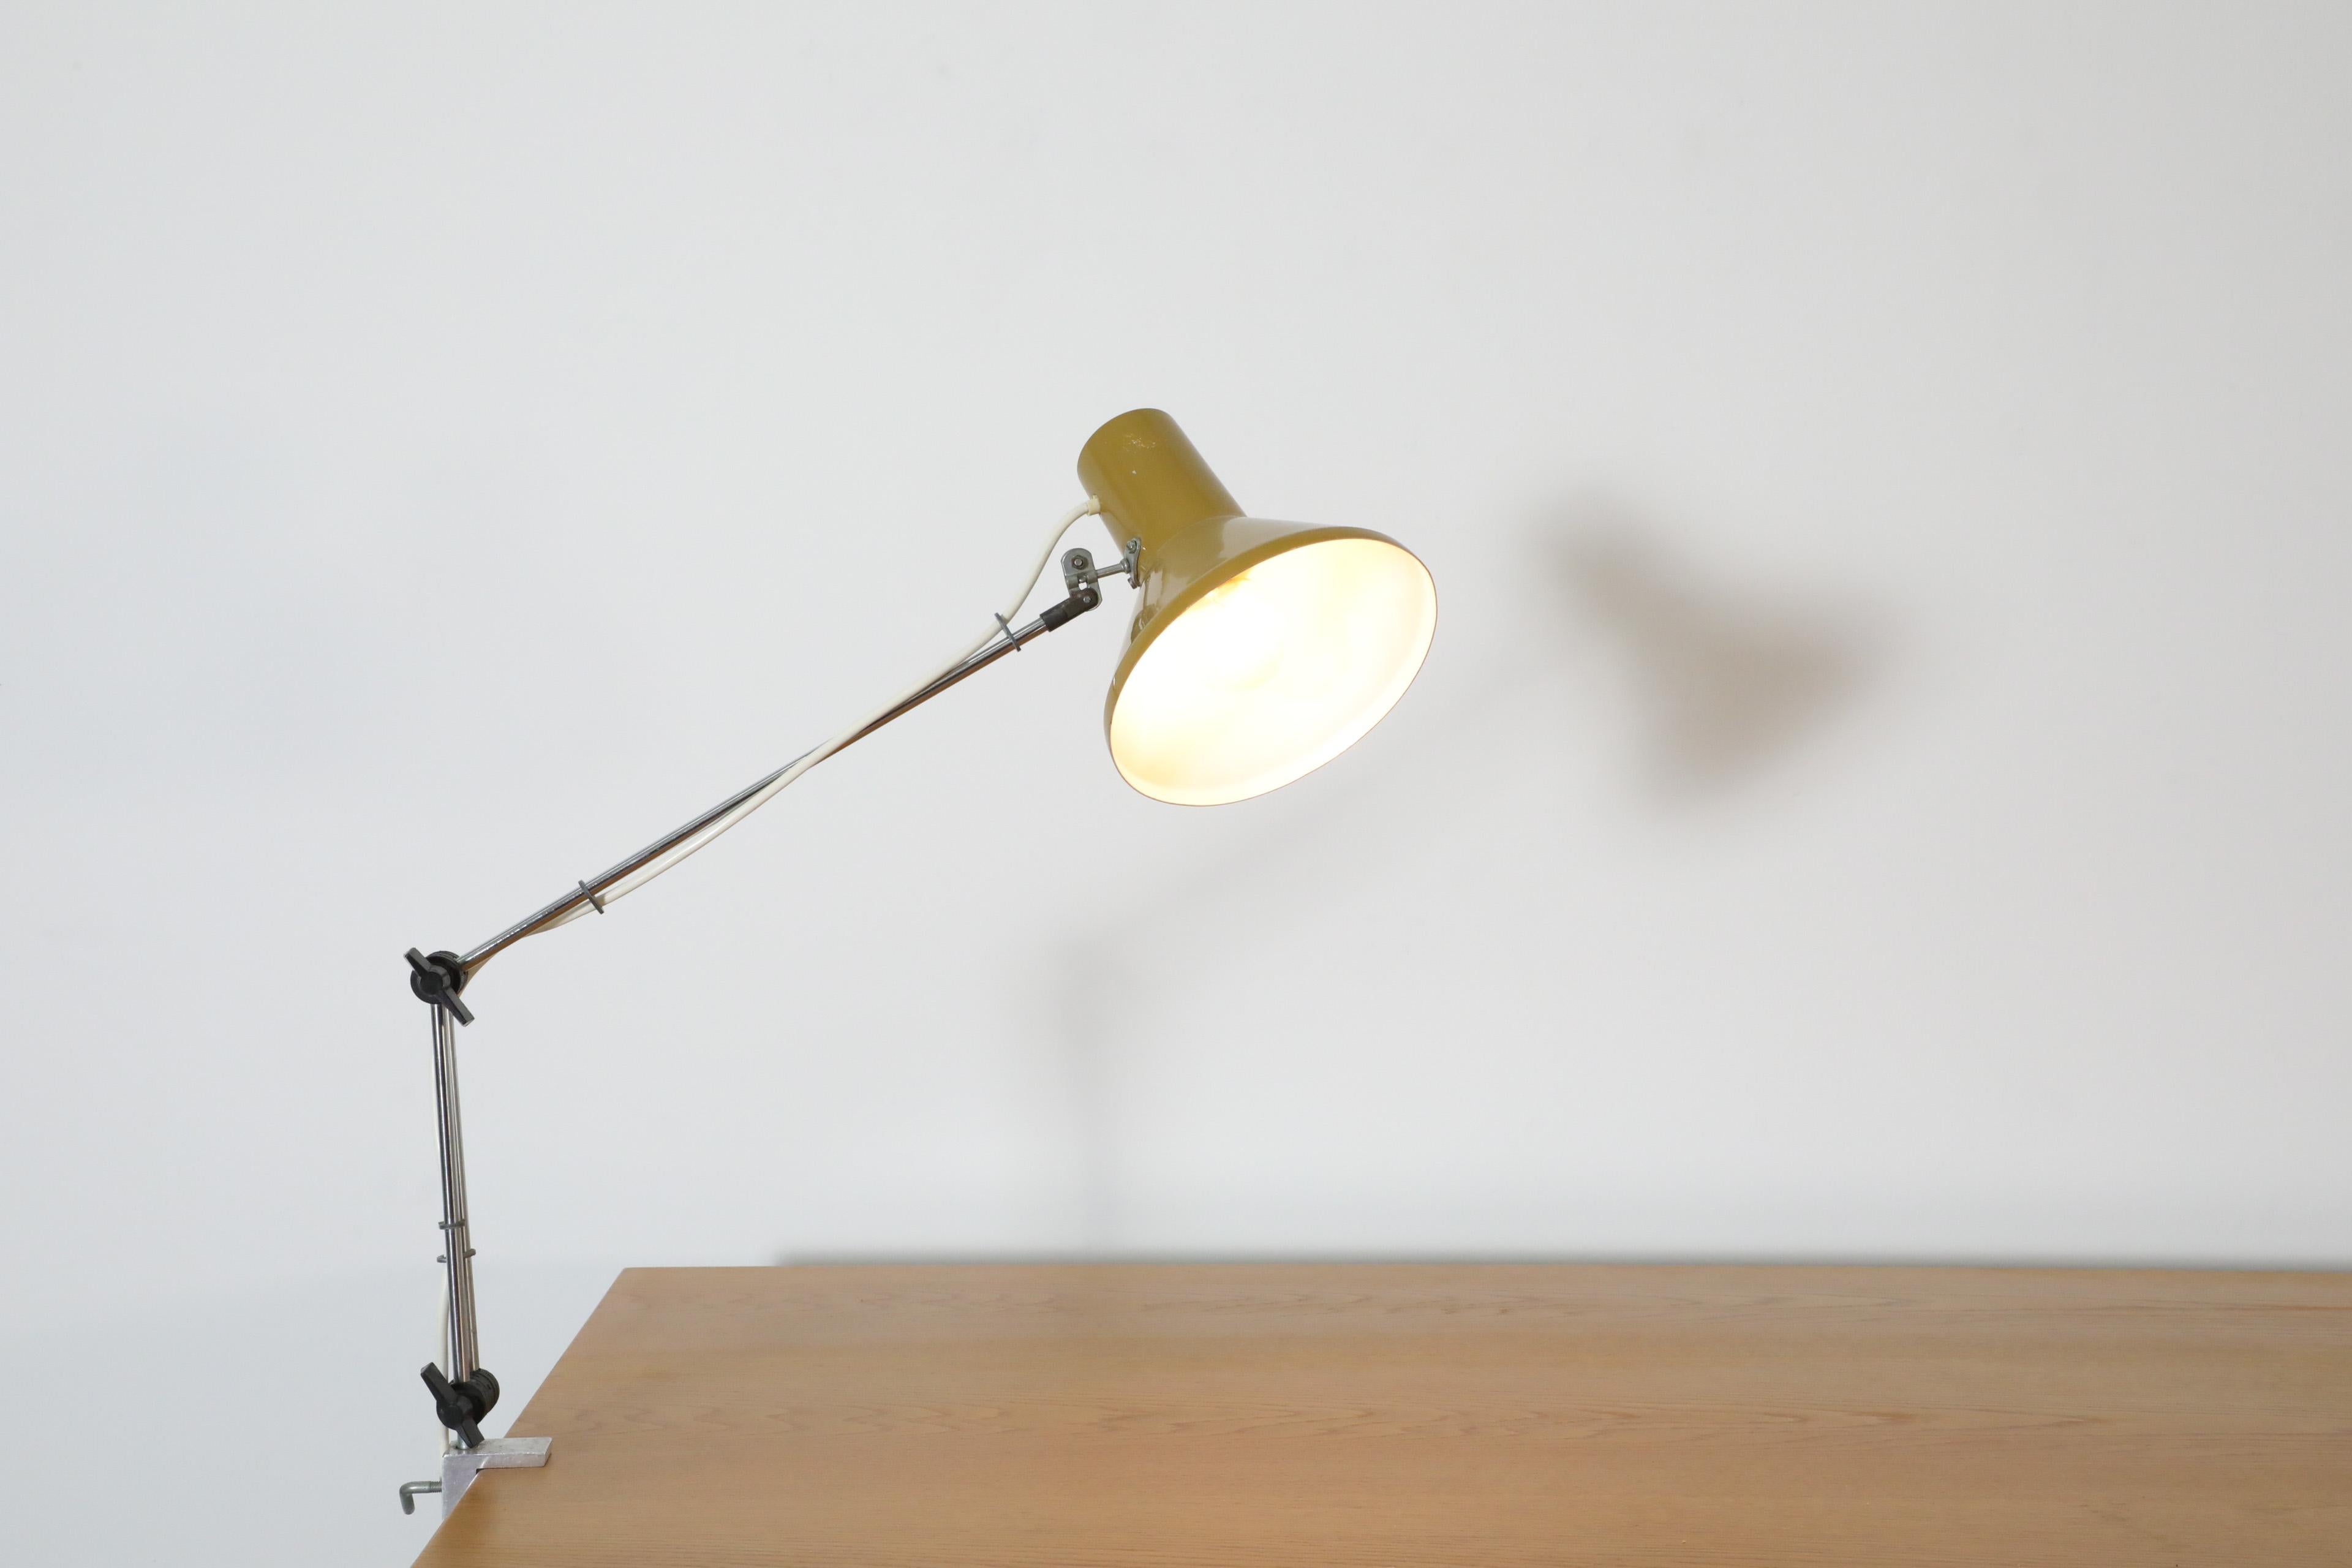 Mid-Century Hungarian industrial clamp on table lamp with olive enameled metal shade, chrome hardware and a solid aluminum clamp. In original condition with visiblewear and scratching consistent with age and use. Other clamp-on drafting lamps are